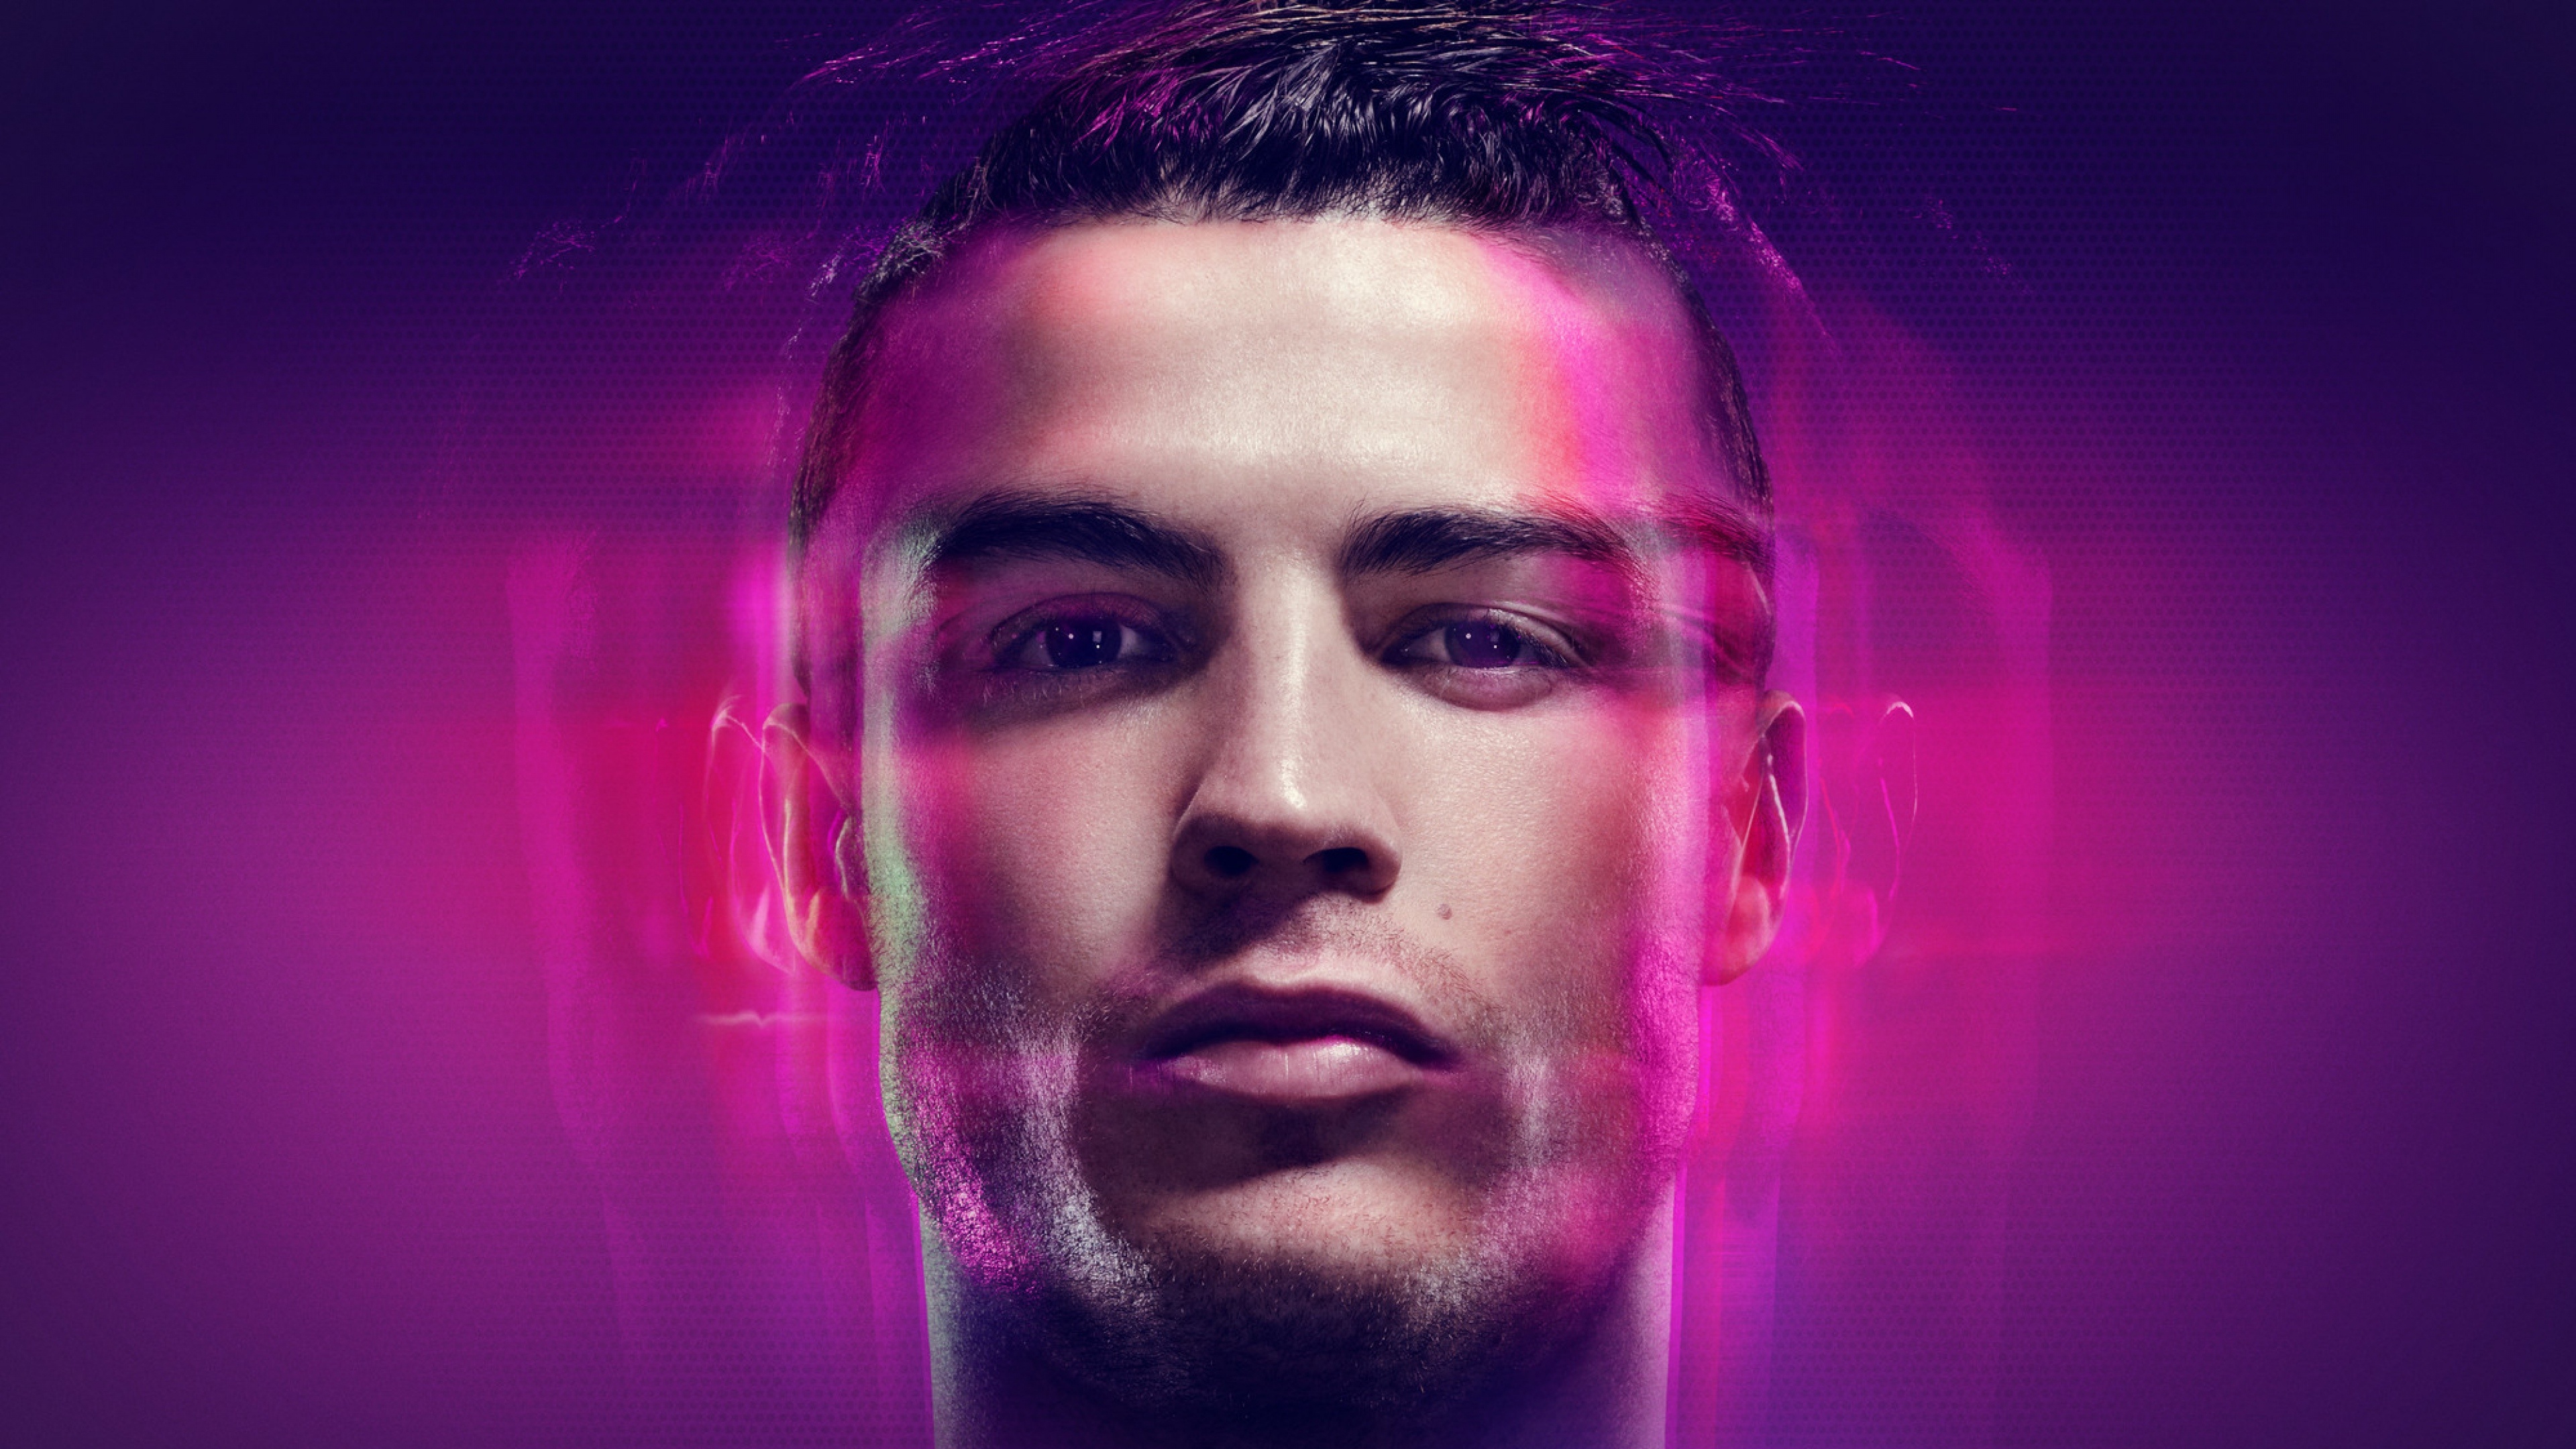 Cristiano Ronaldo 4k Wallpapers In Jpg Format For Free Download